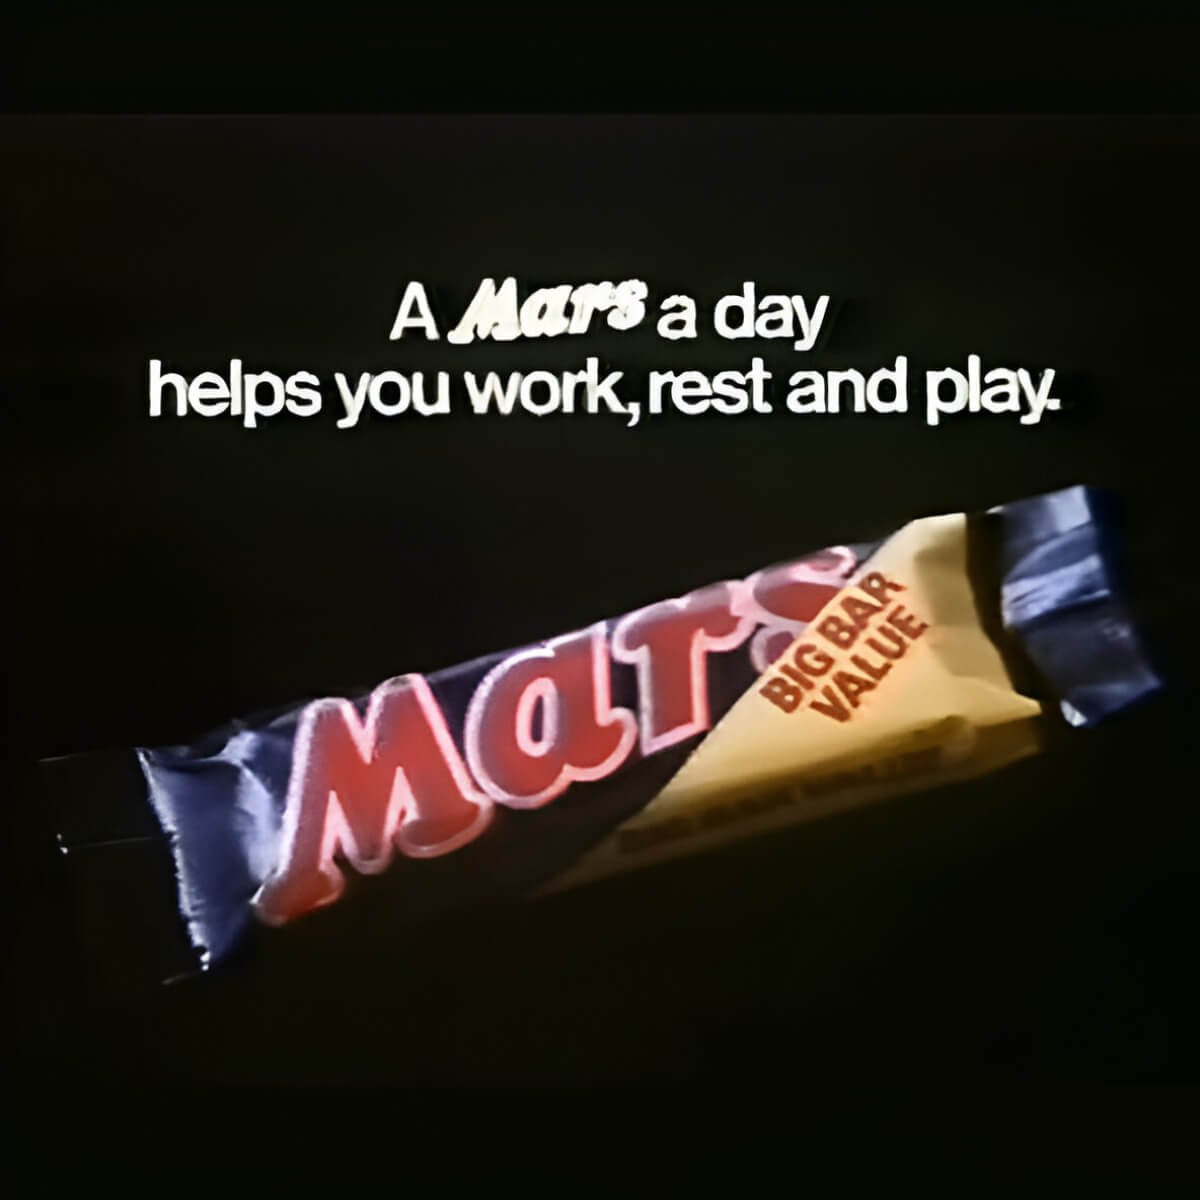 Mars bar with slogan A Mars a day helps you work, rest and play. Black background